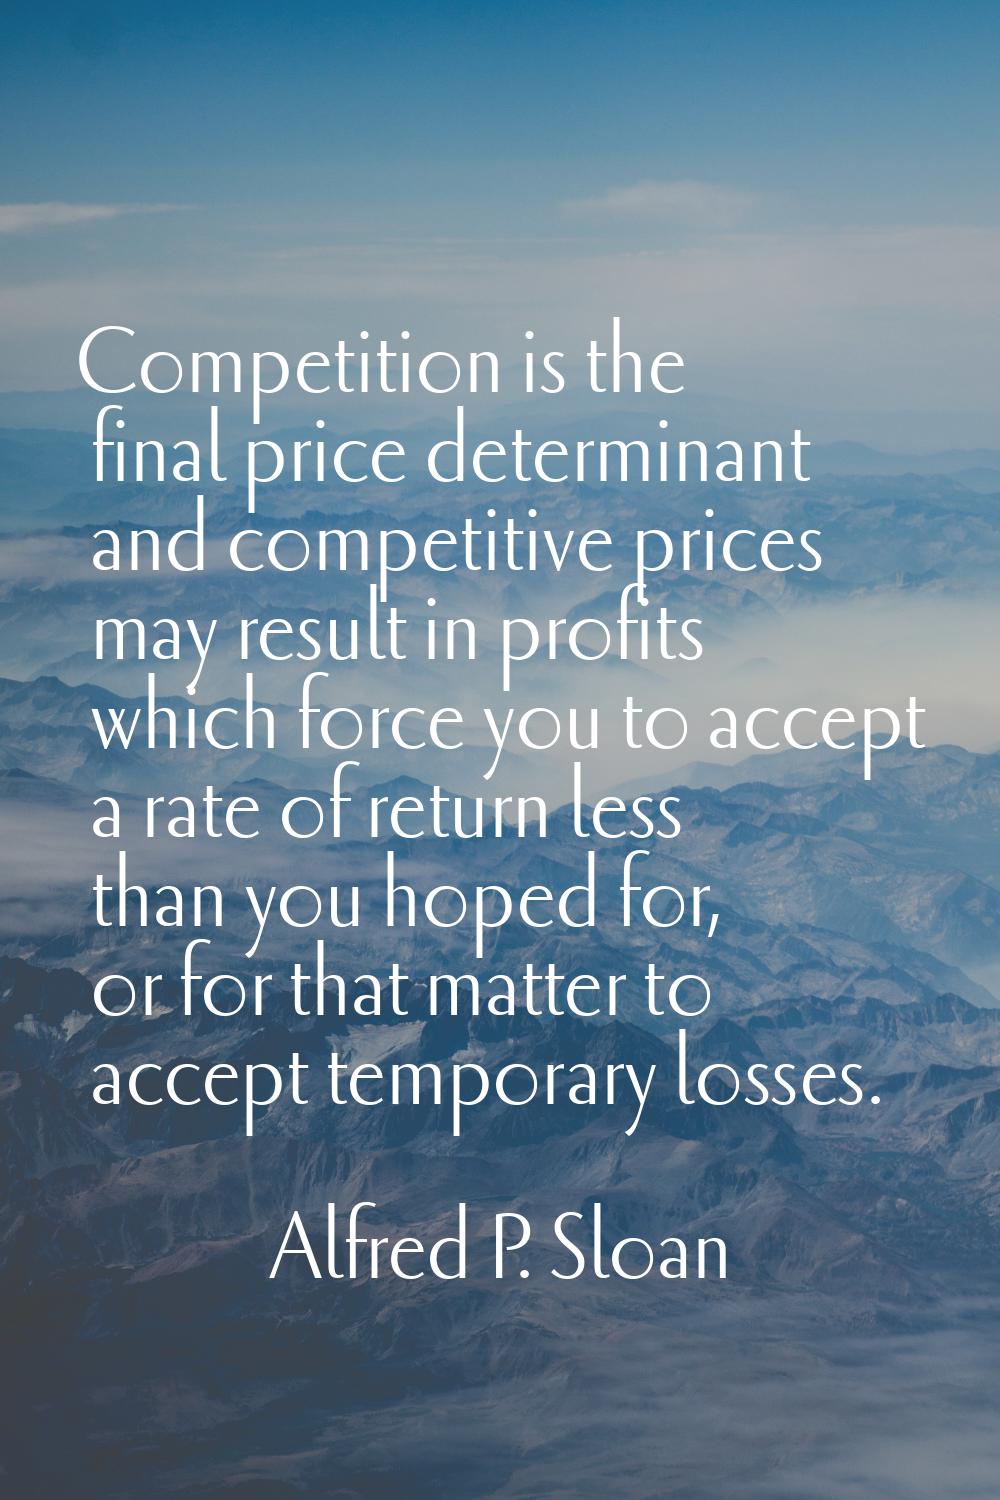 Competition is the final price determinant and competitive prices may result in profits which force